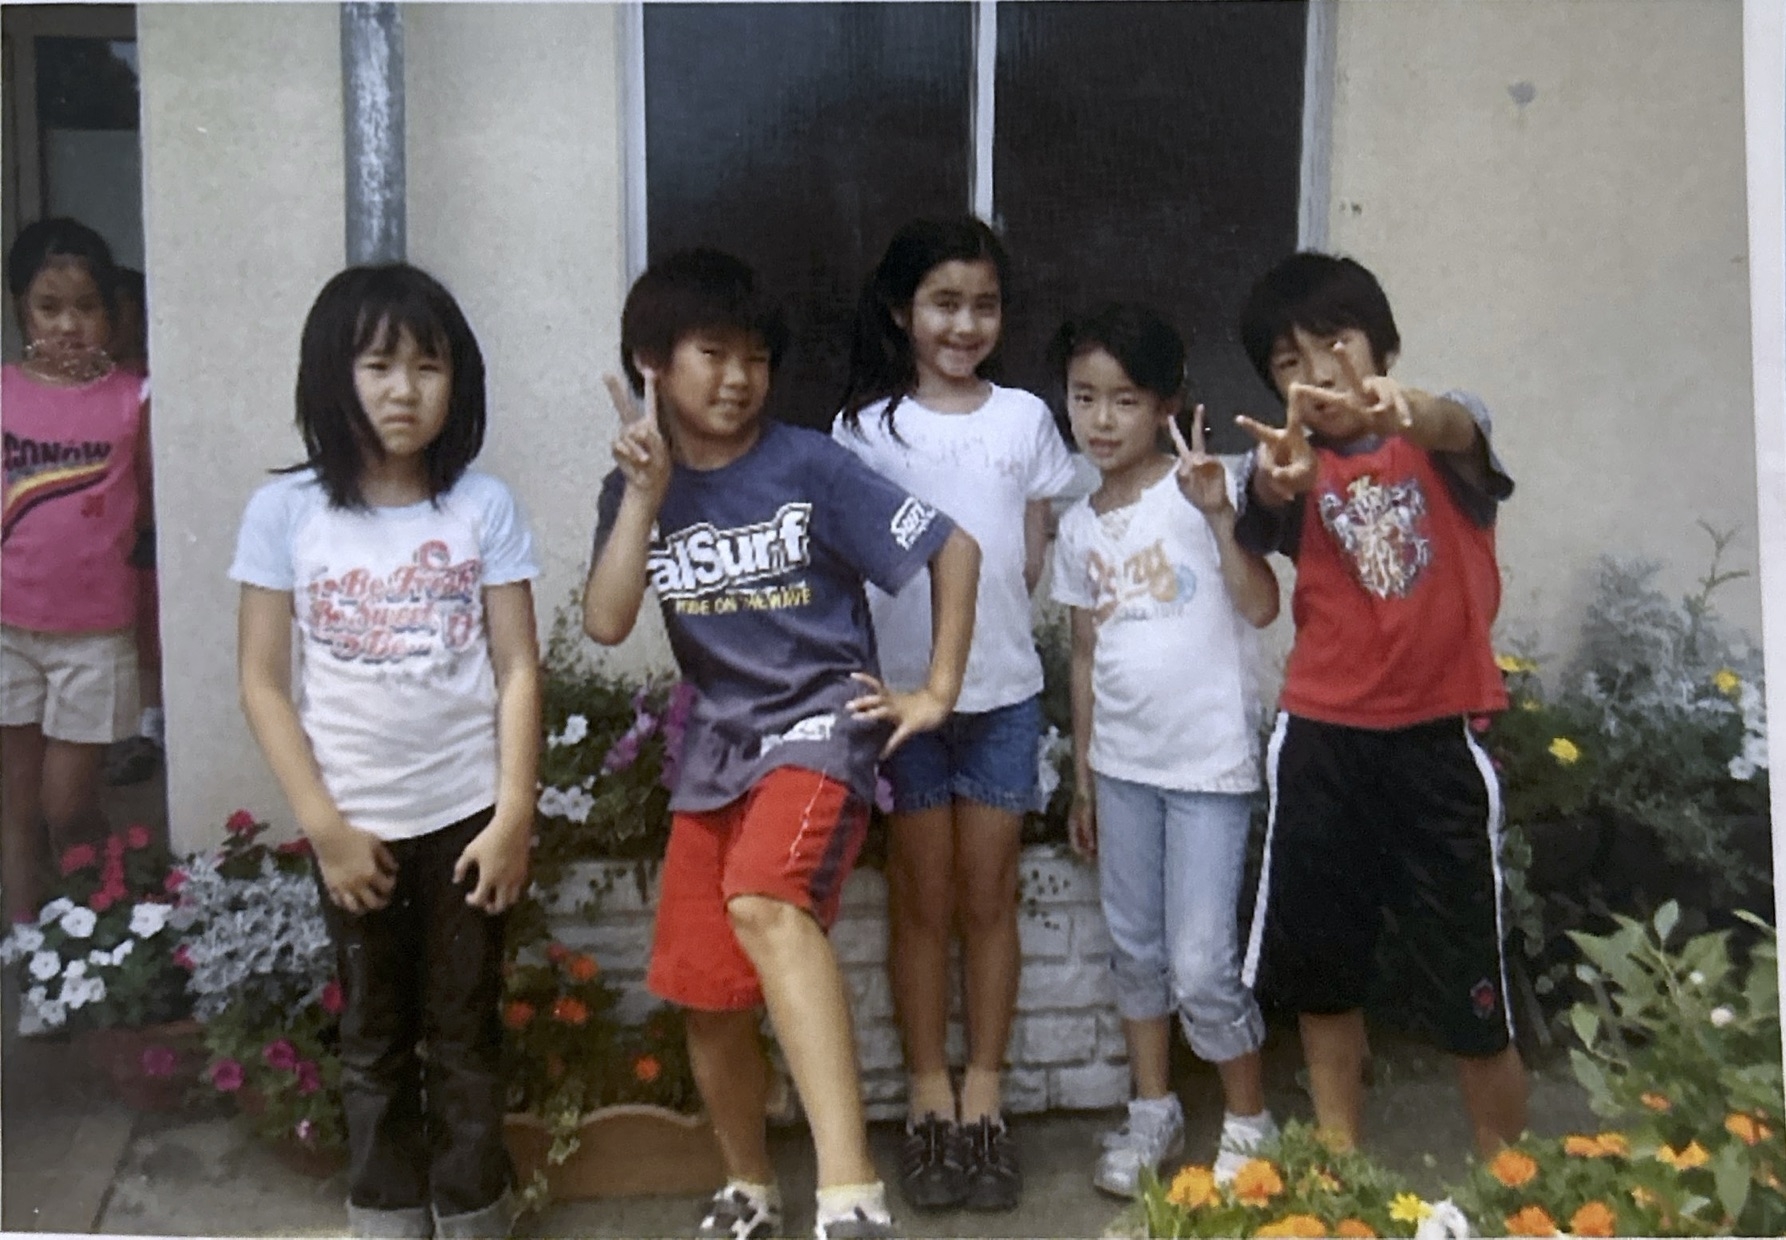 Group of children posing playfully in front of a building